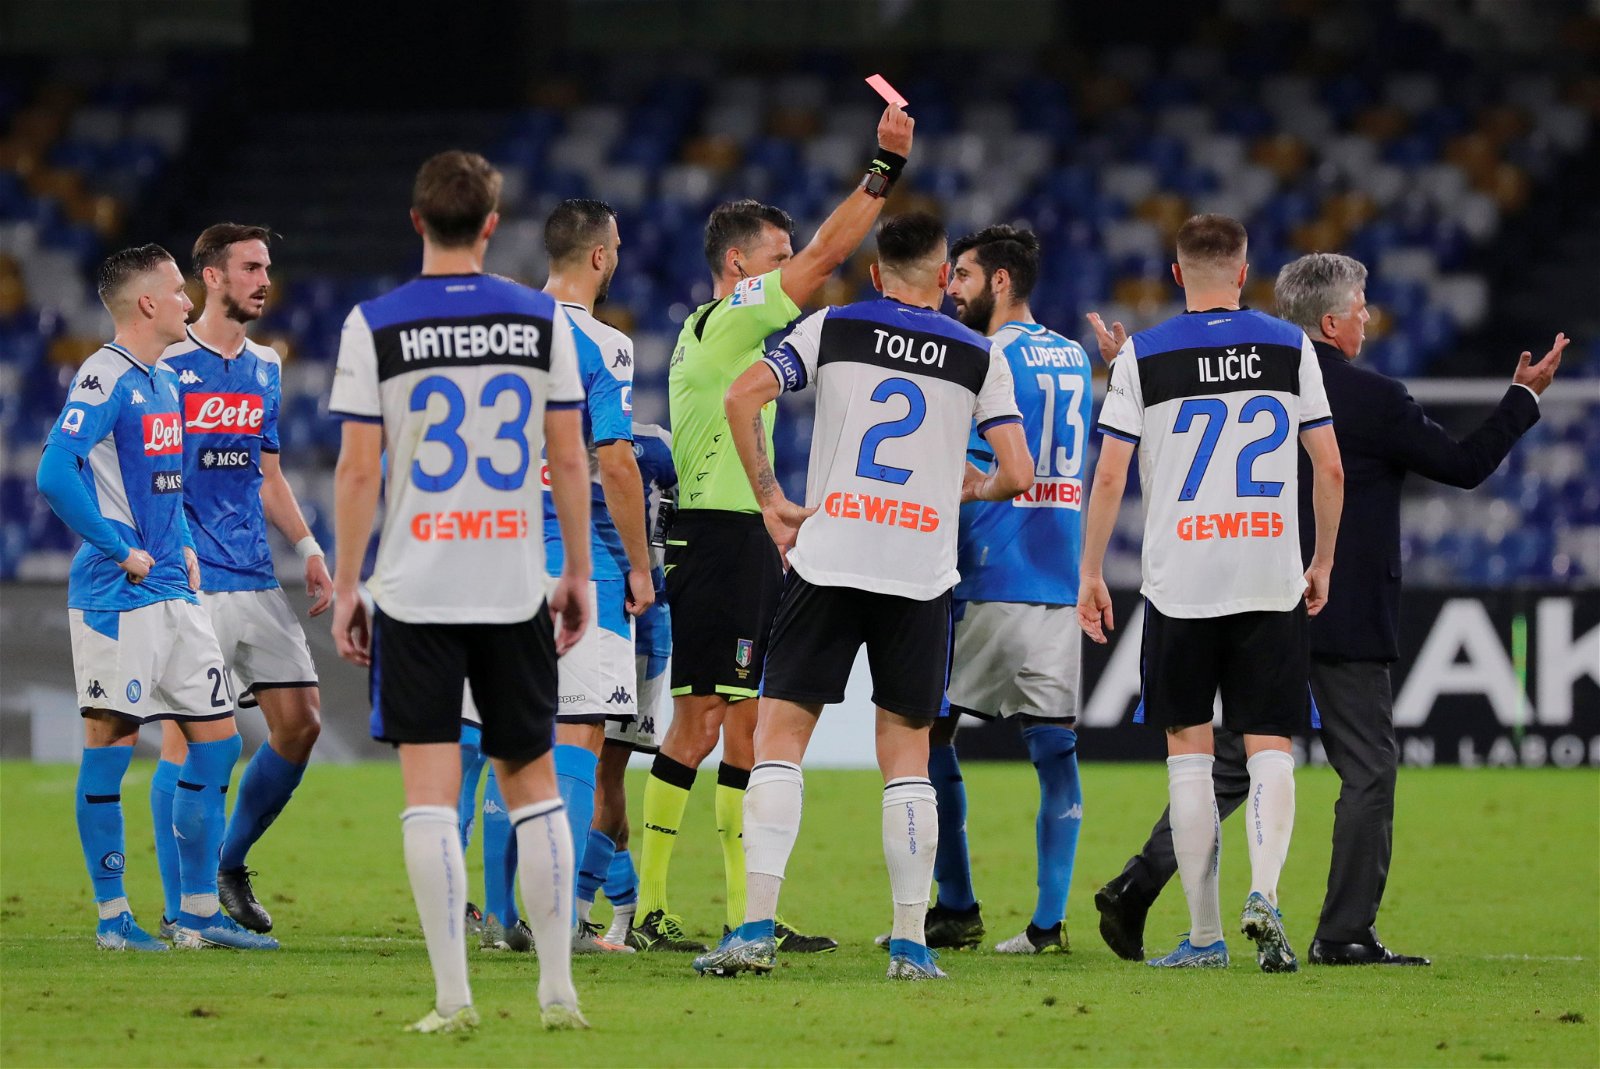 Napoli boss Carlo Ancelotti upset with officials for late send off against Atalanta